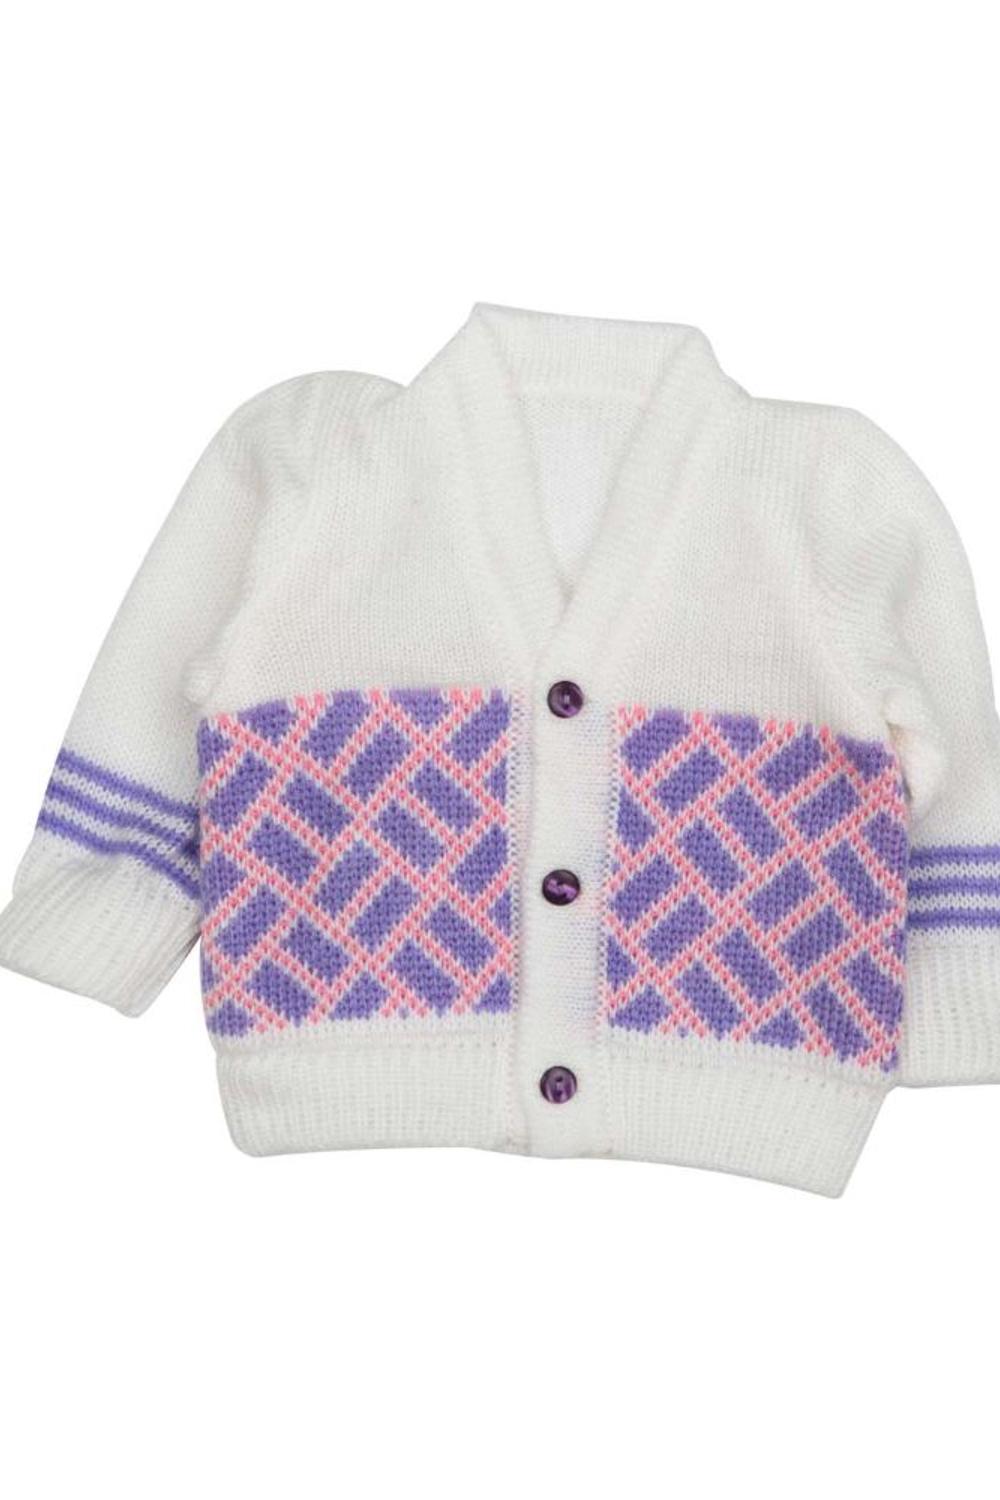 Mee Mee Baby Sweater Sets (White, Purple, Neon Pink)